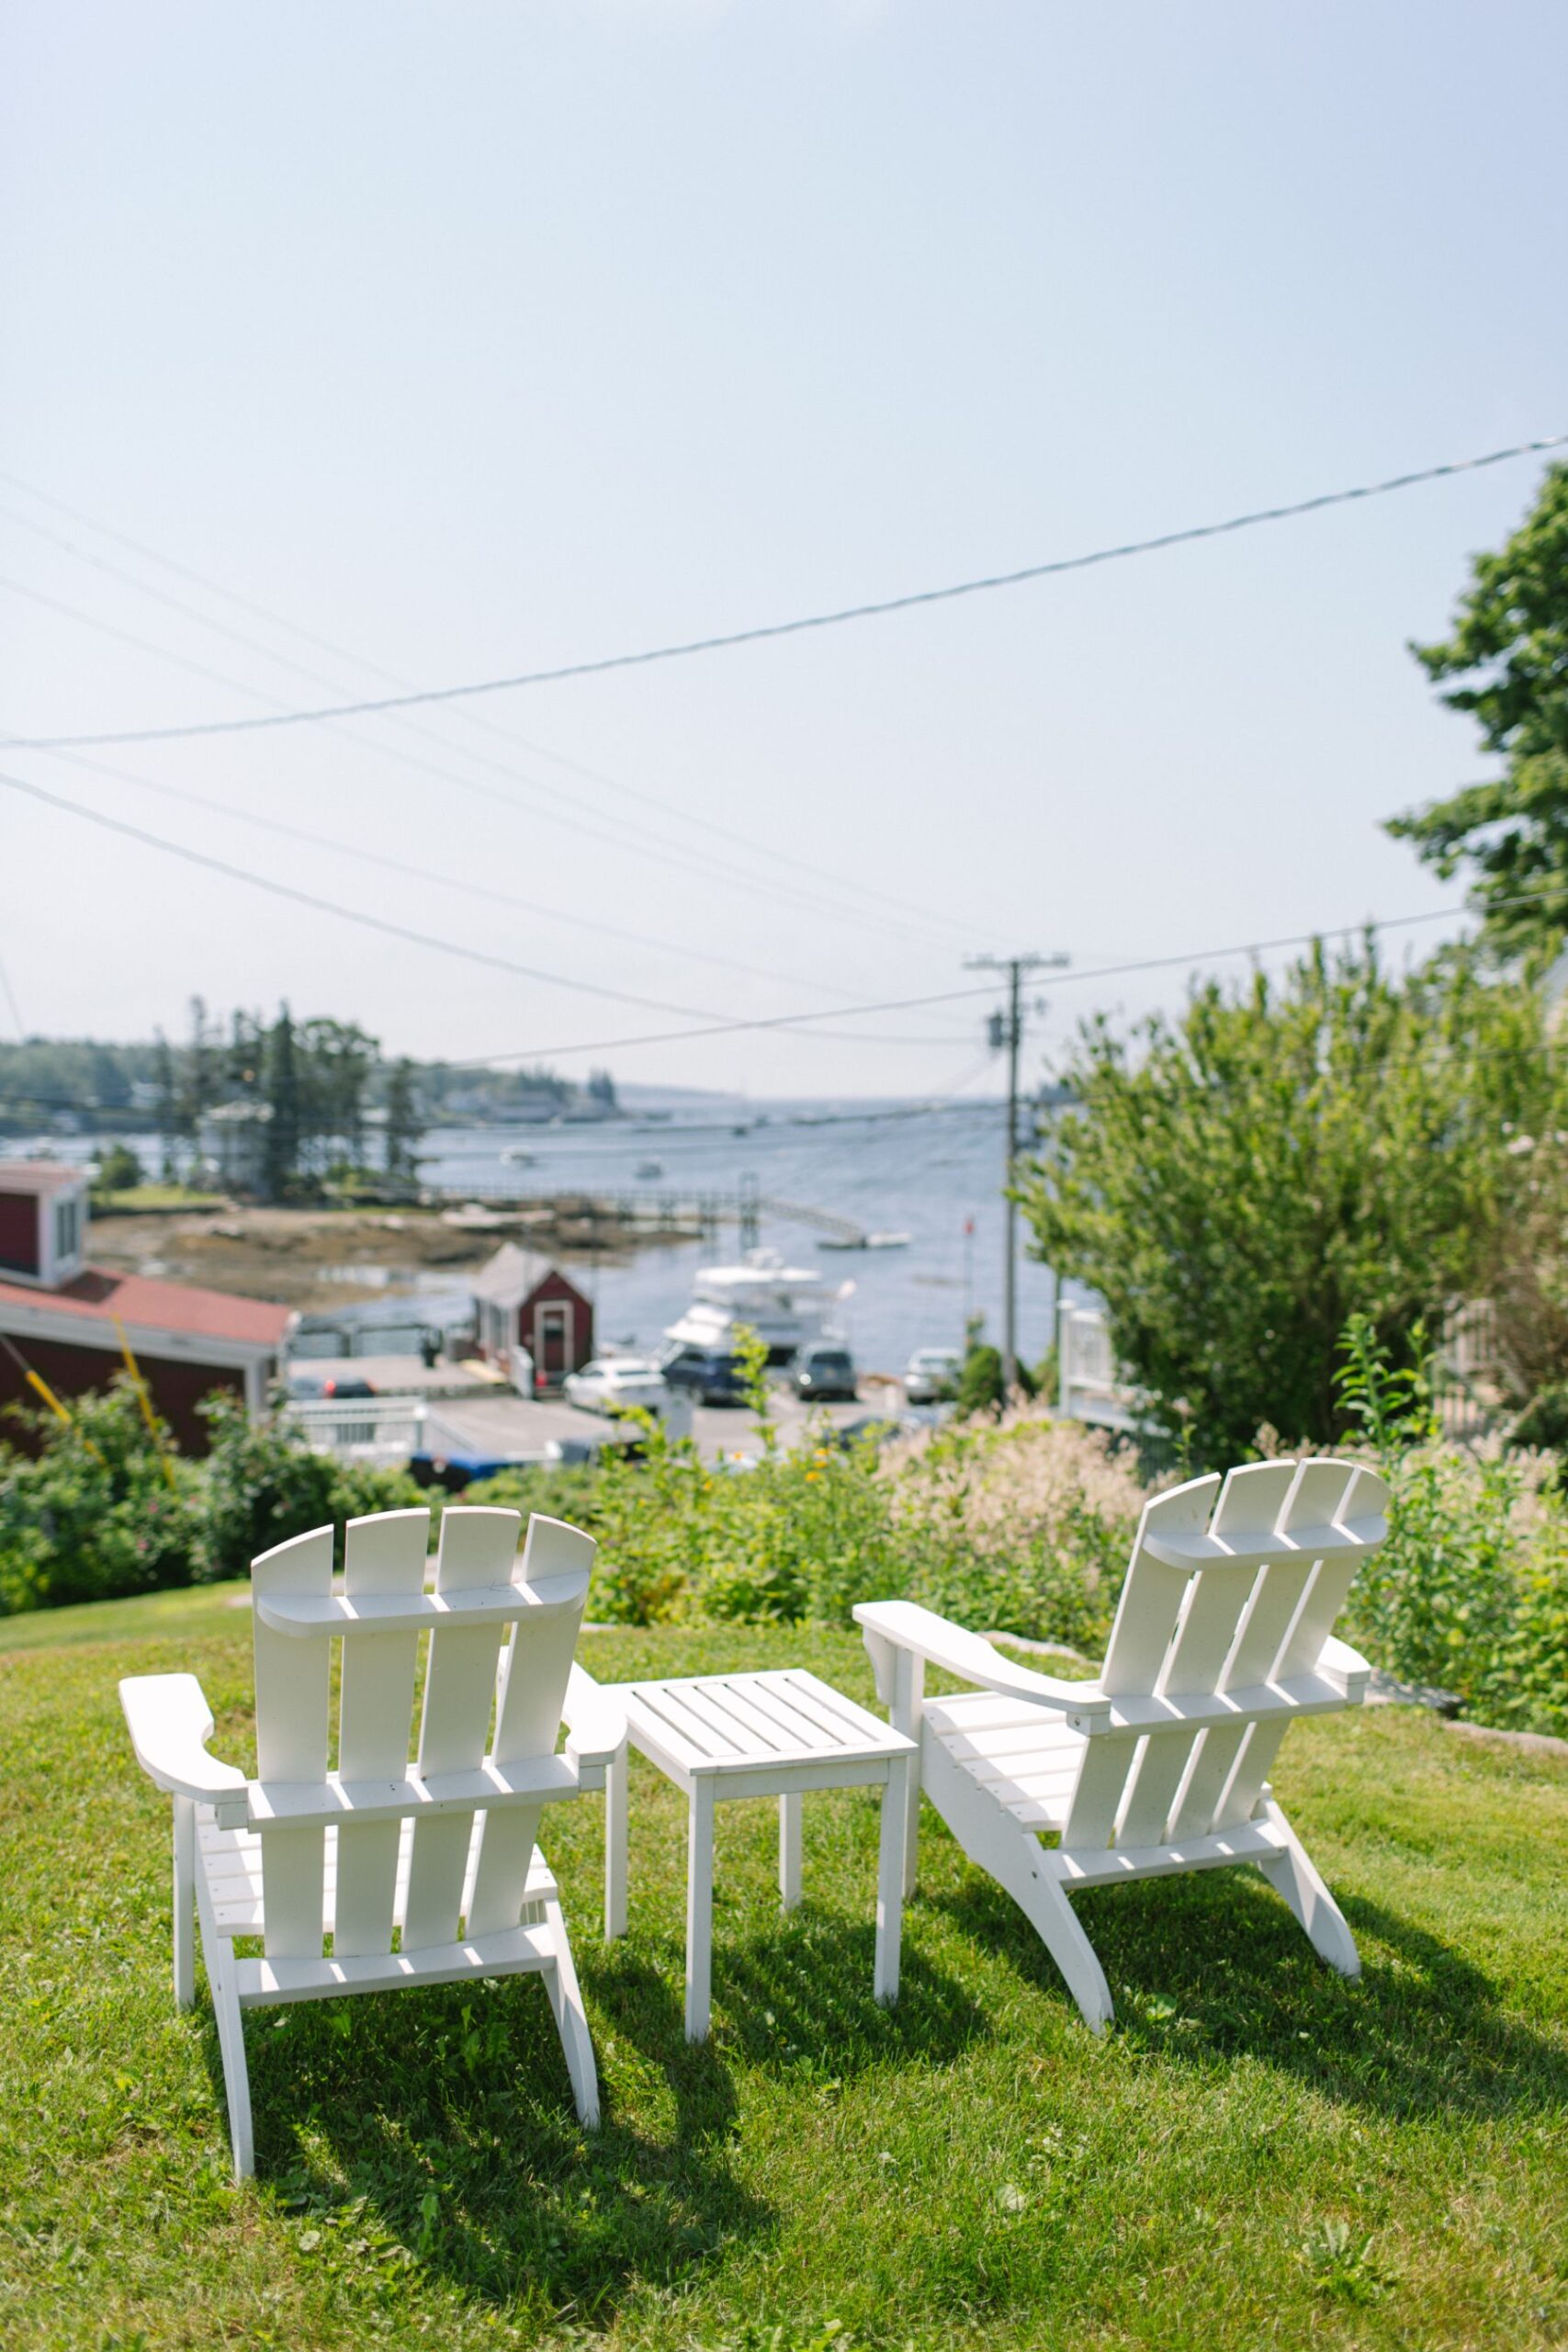 The best deals and things to do in Boothbay Harbor